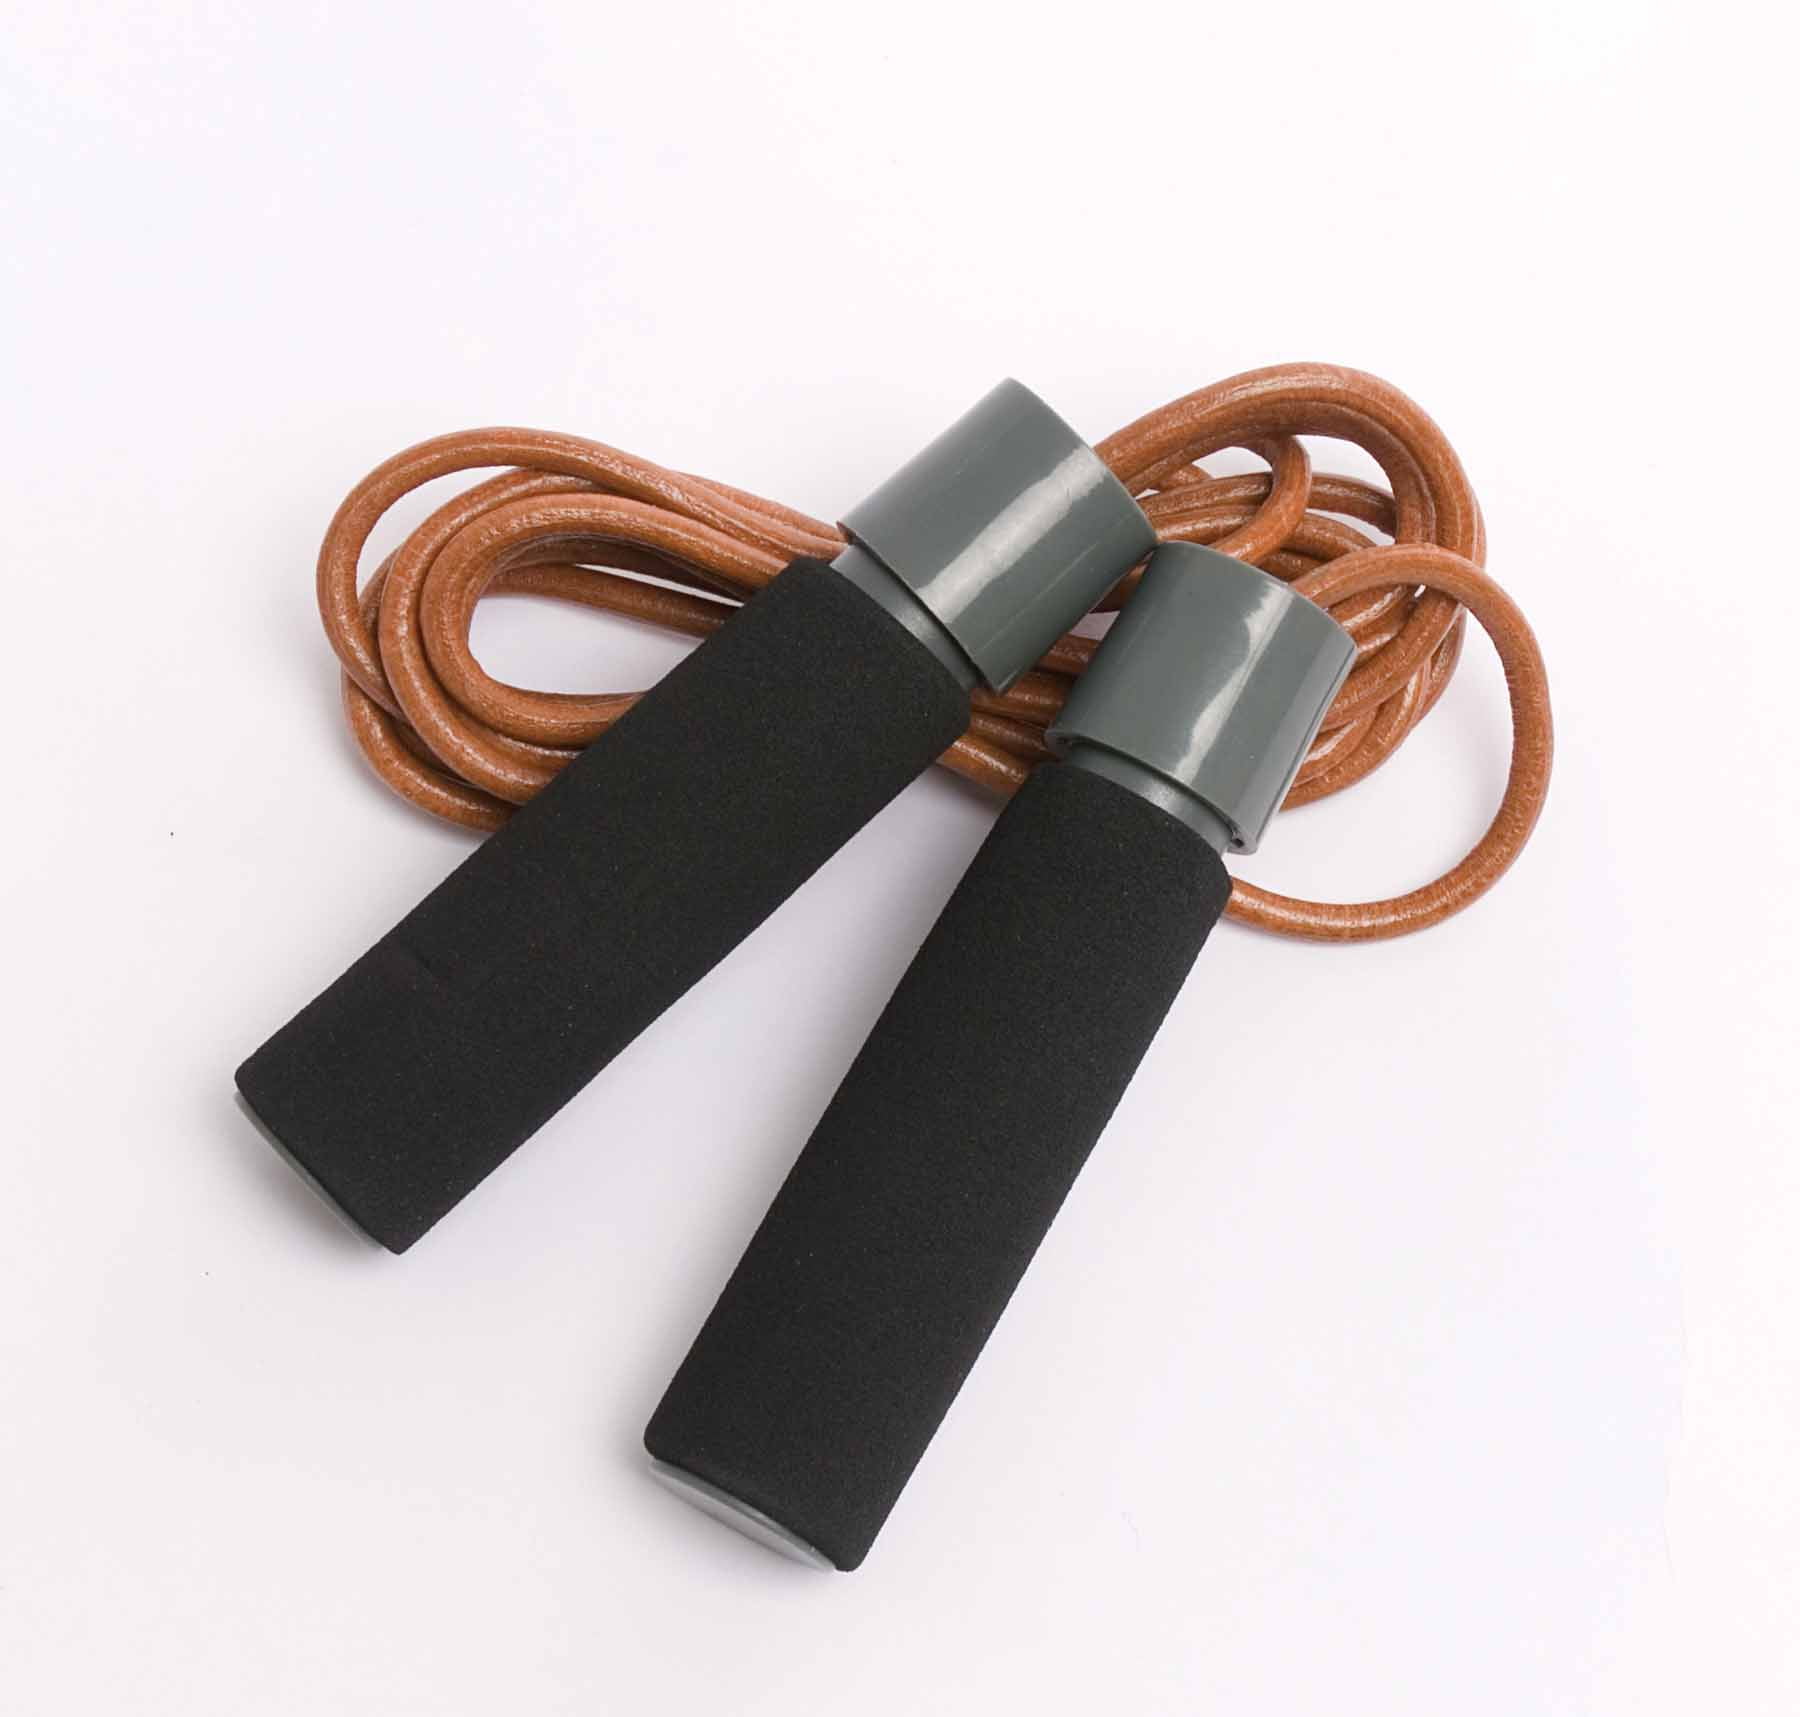 Details about   Skipping Rope Skip Counter  Jump Boxing Jumping Gym Fitness Kids Adult New 